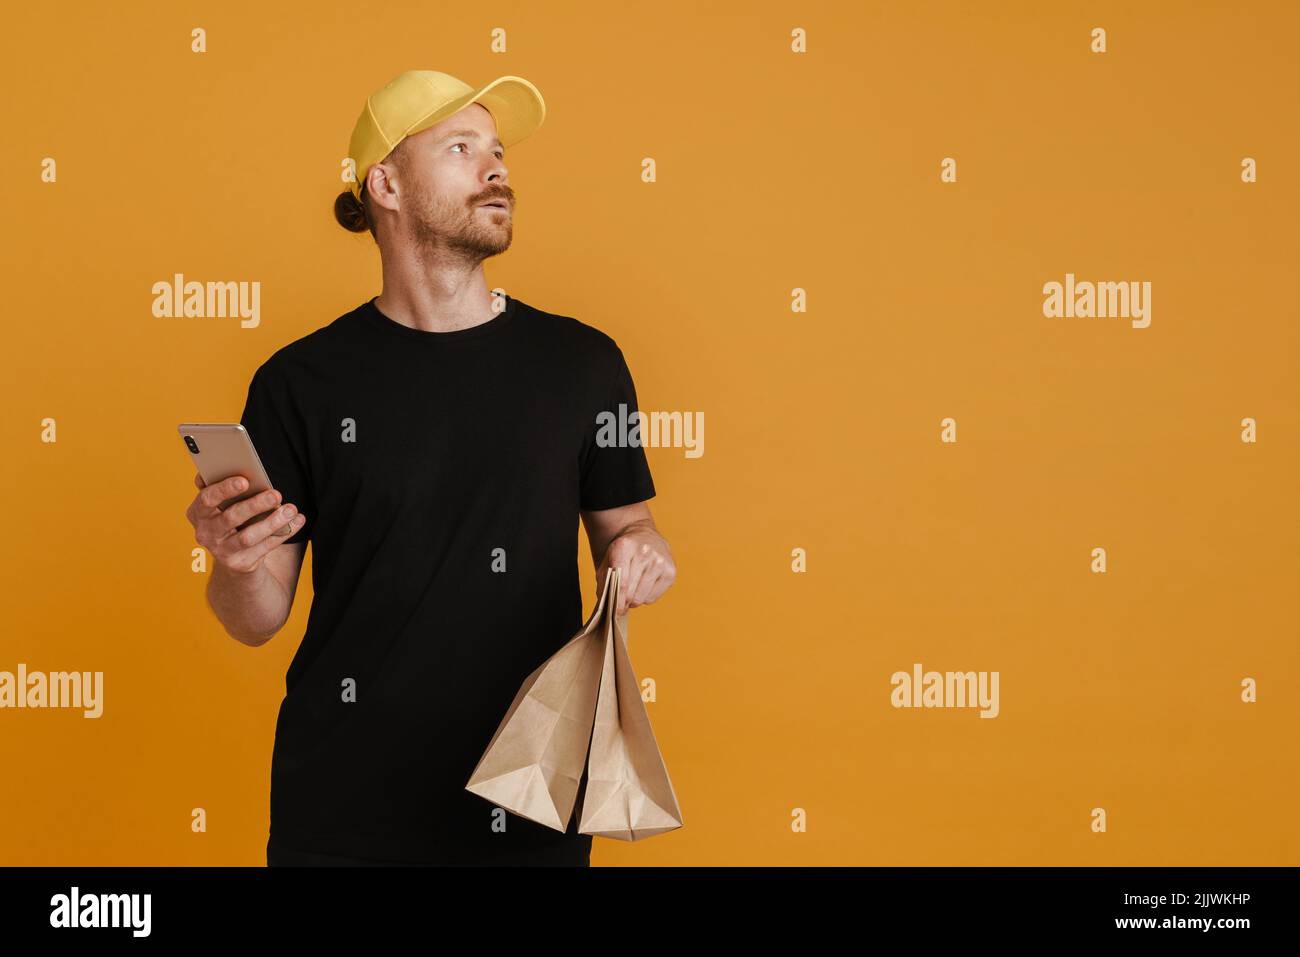 White delivery man with paper bags using mobile phone isolated over yellow background Stock Photo